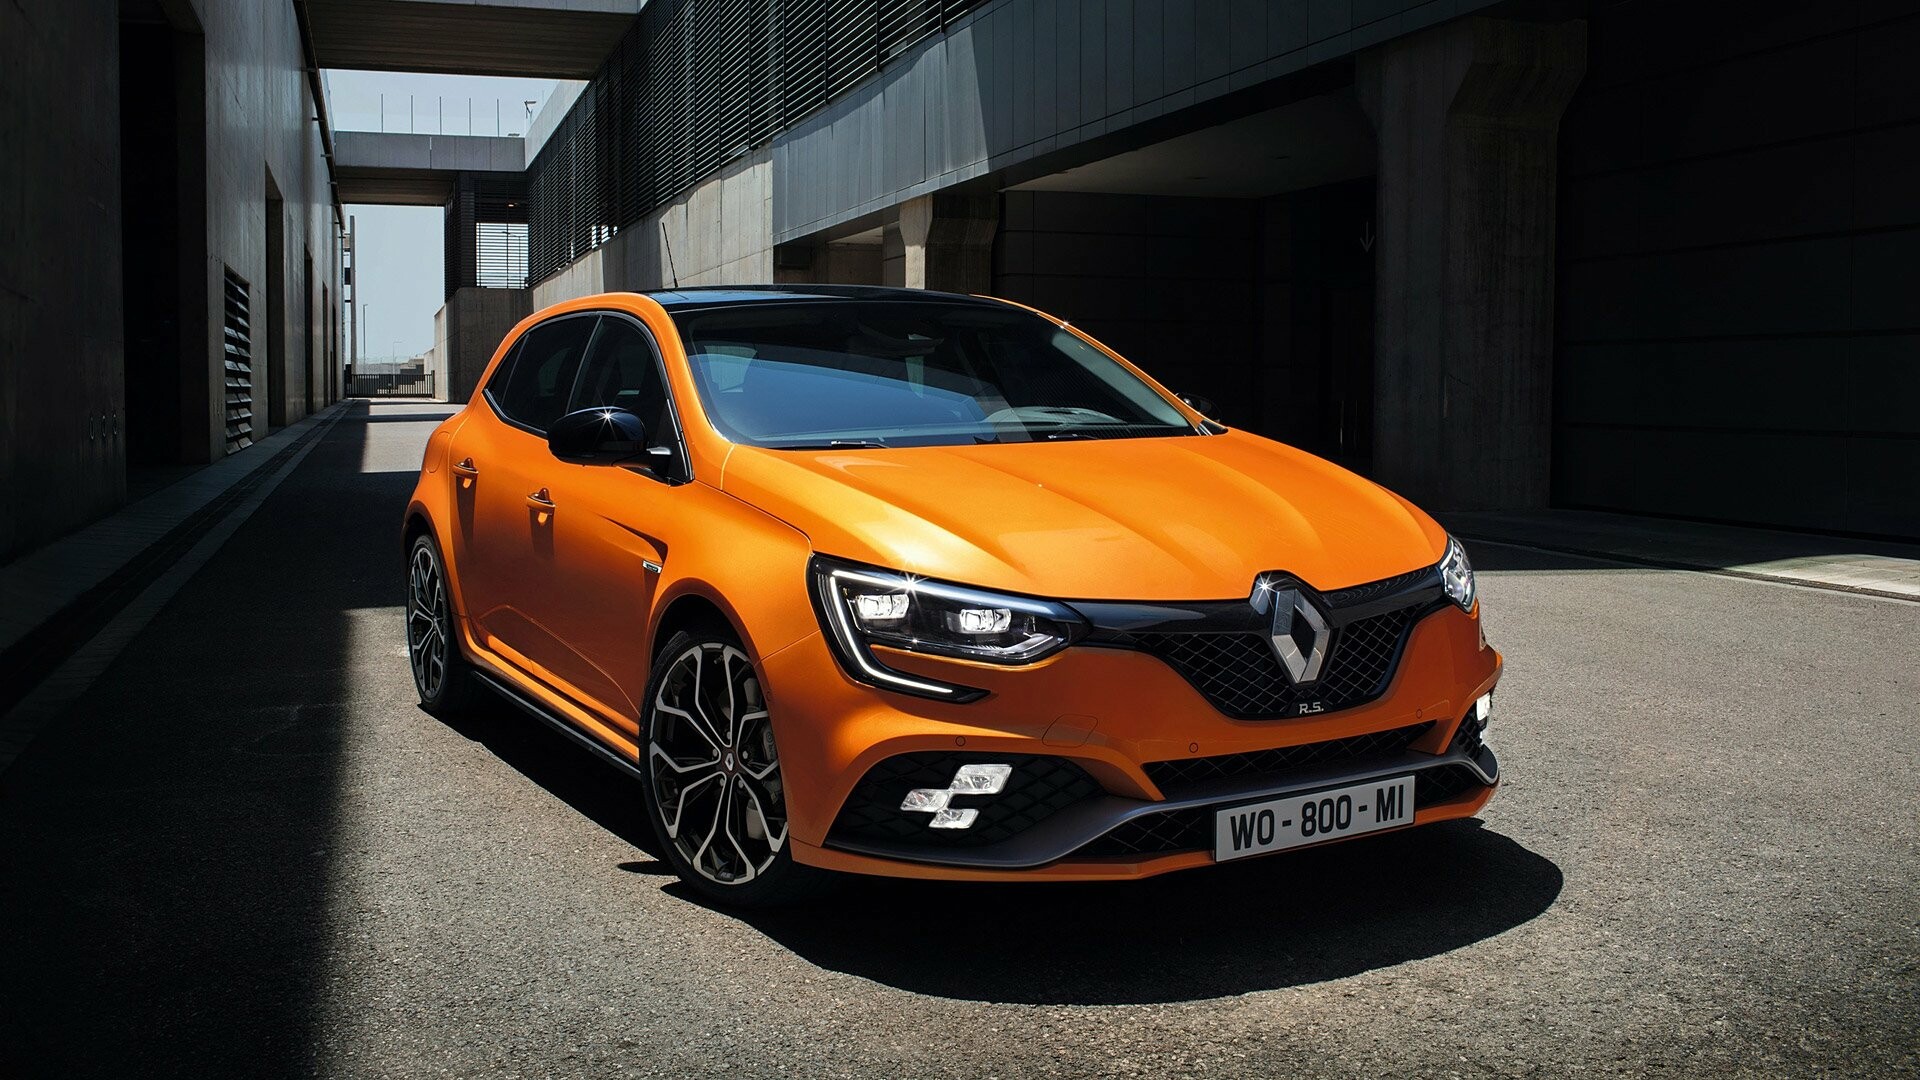 Renault: A French automotive manufacturer, Megane, A small family car. 1920x1080 Full HD Wallpaper.